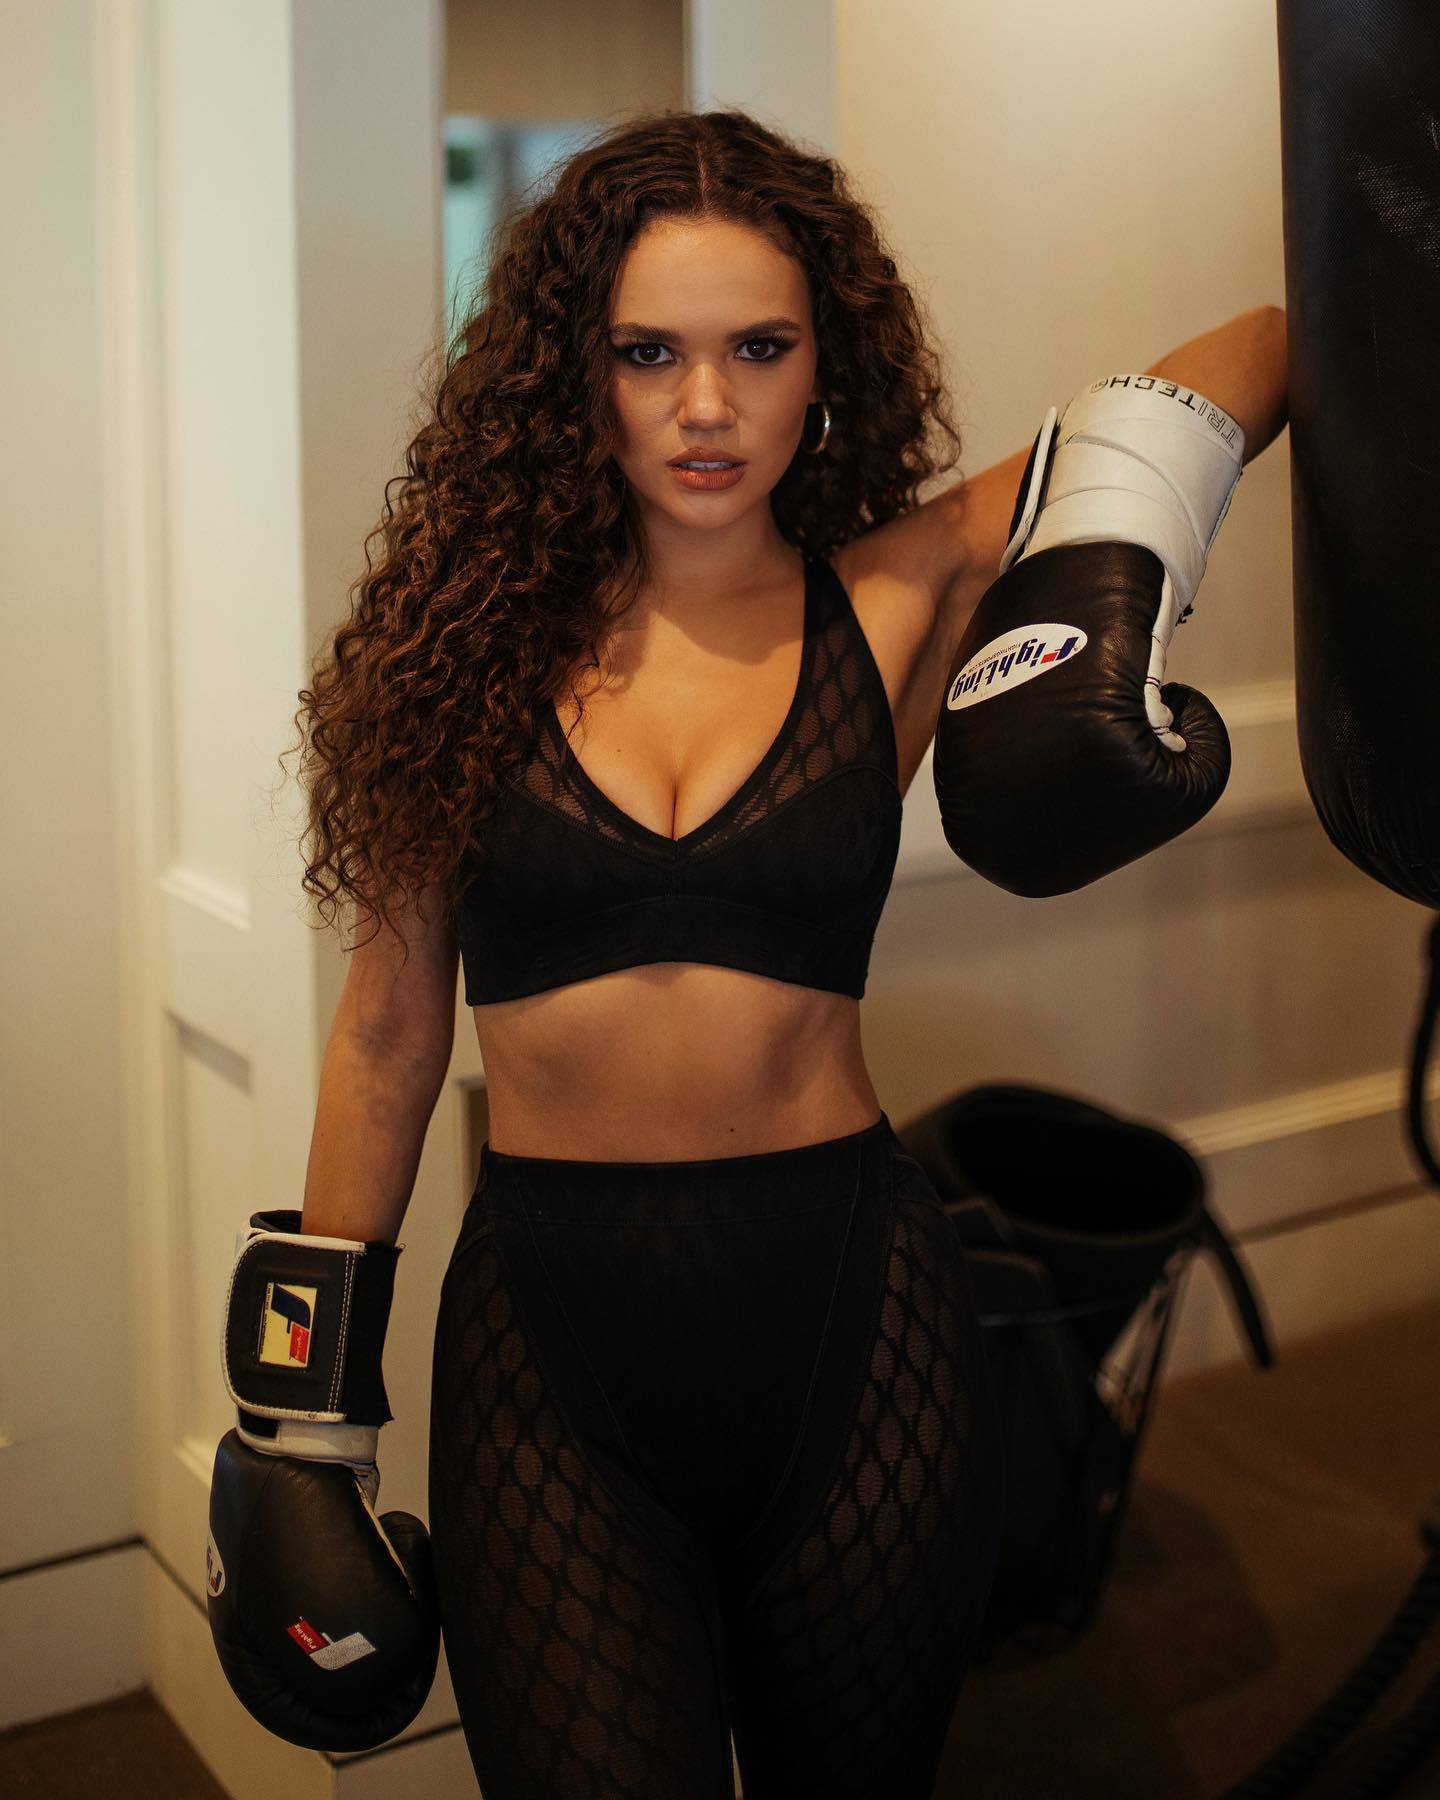 Madison Pettis Gets Sexy for Christmas! - Photo 23